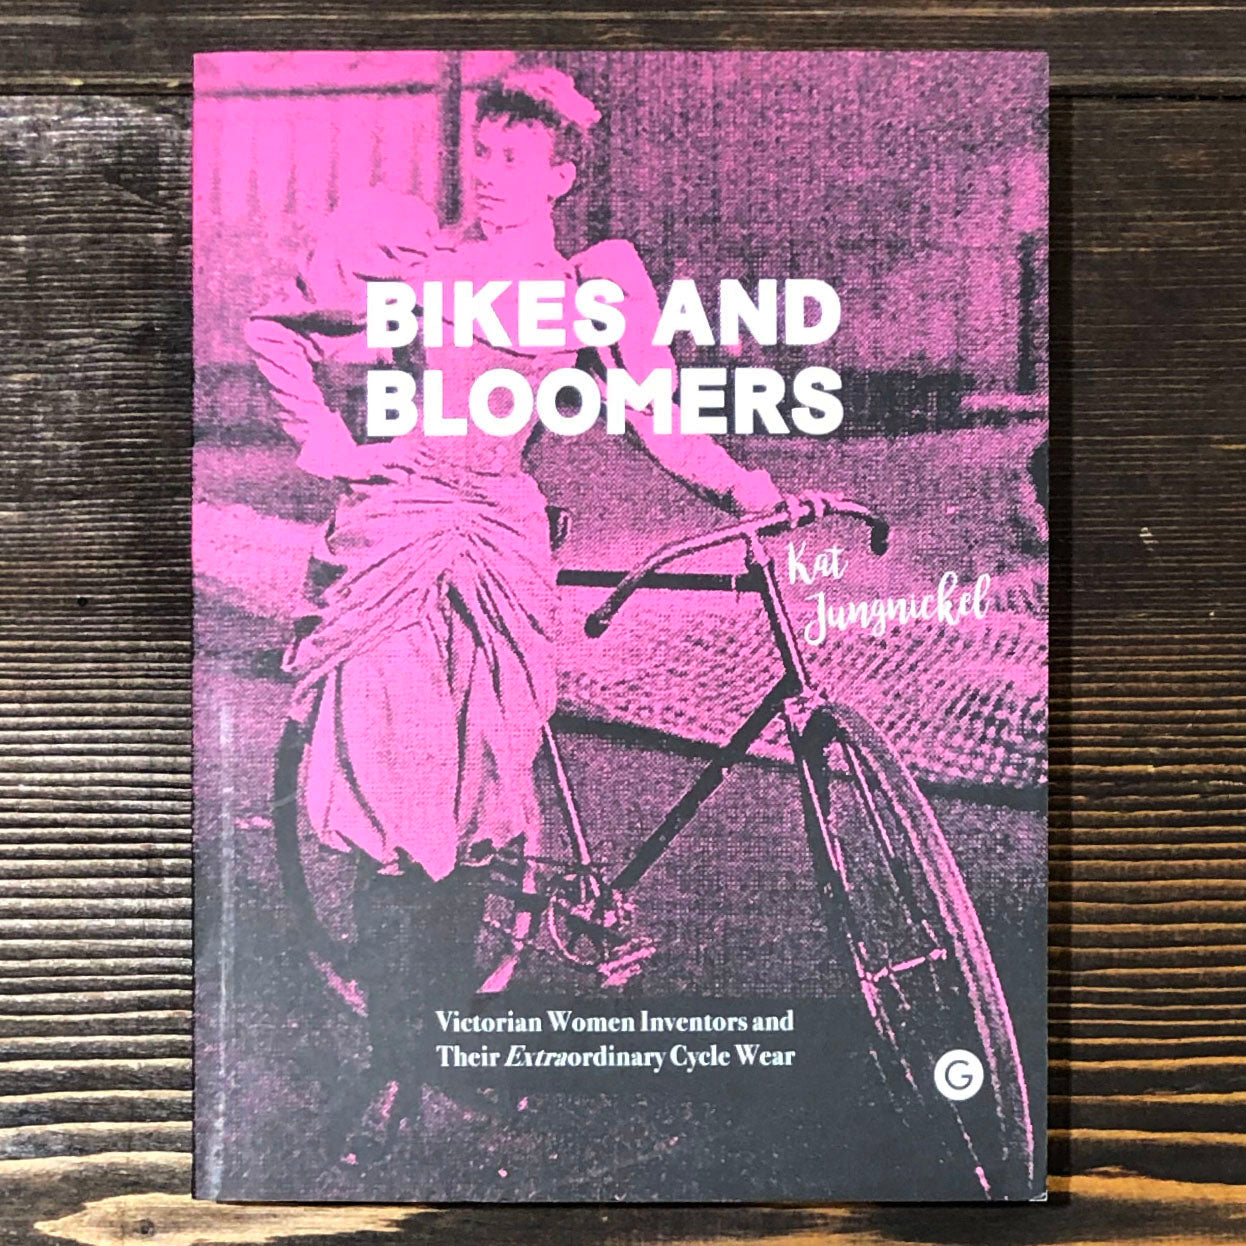 BIKES AND BLOOMERS. VICTORIAN WOMEN INVENTORS AND THEIR EXTRAORDINARY CYCLE WEAR - KAT JUNGNICKEL